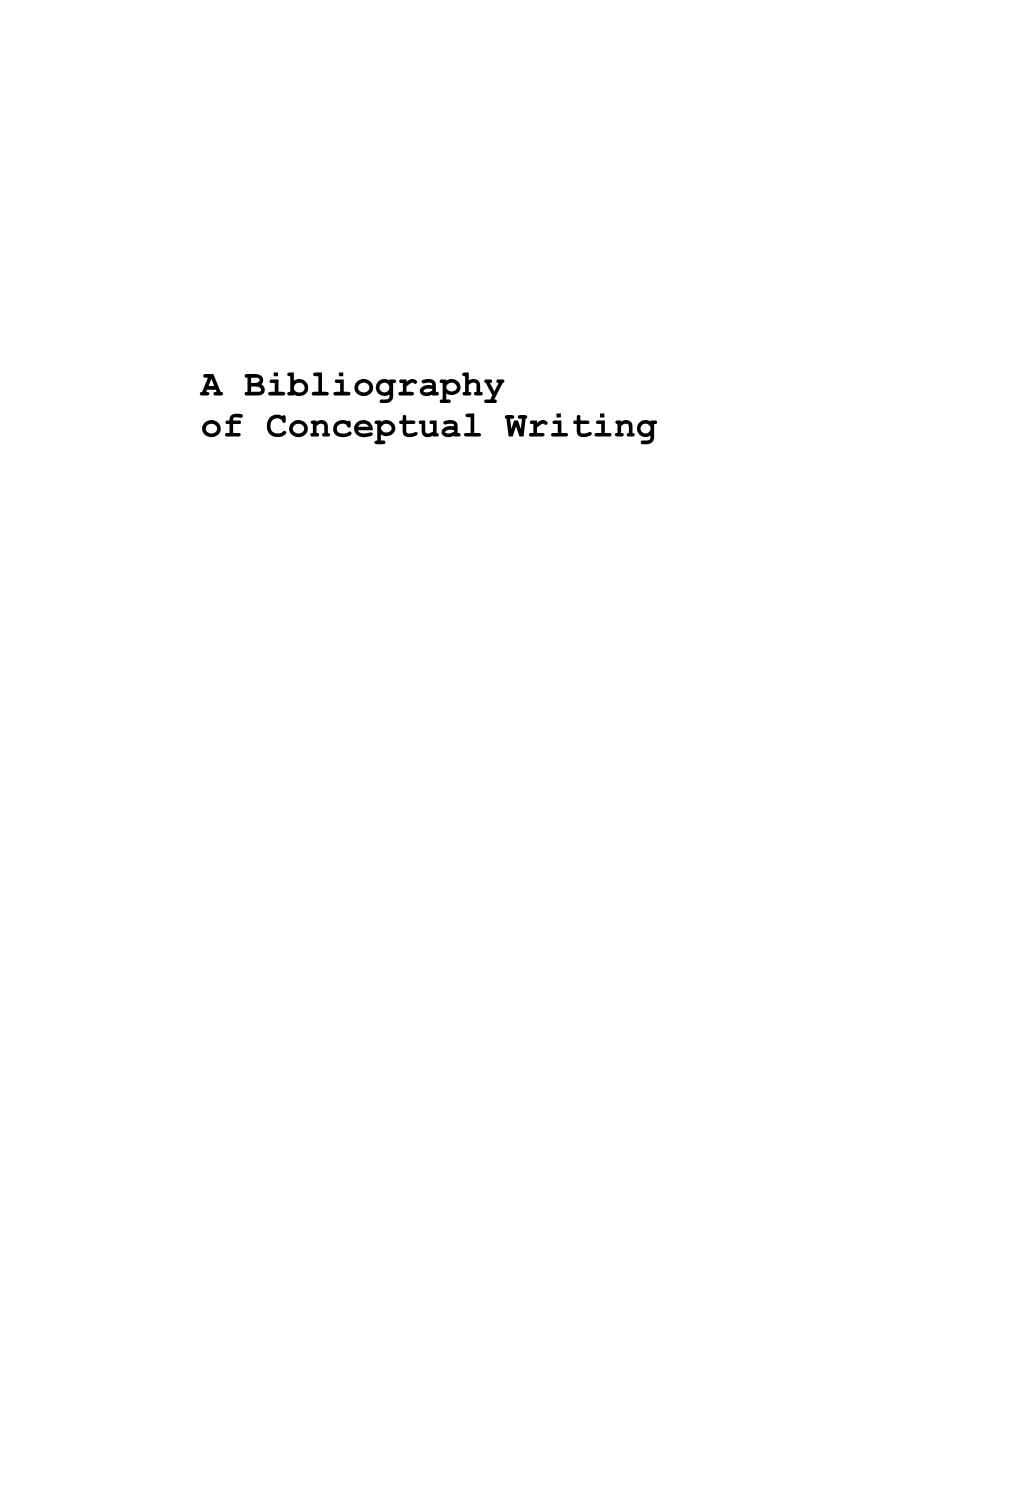 A Bibliography of Conceptual Writing 2 a Bibliography of Conceptual Writing